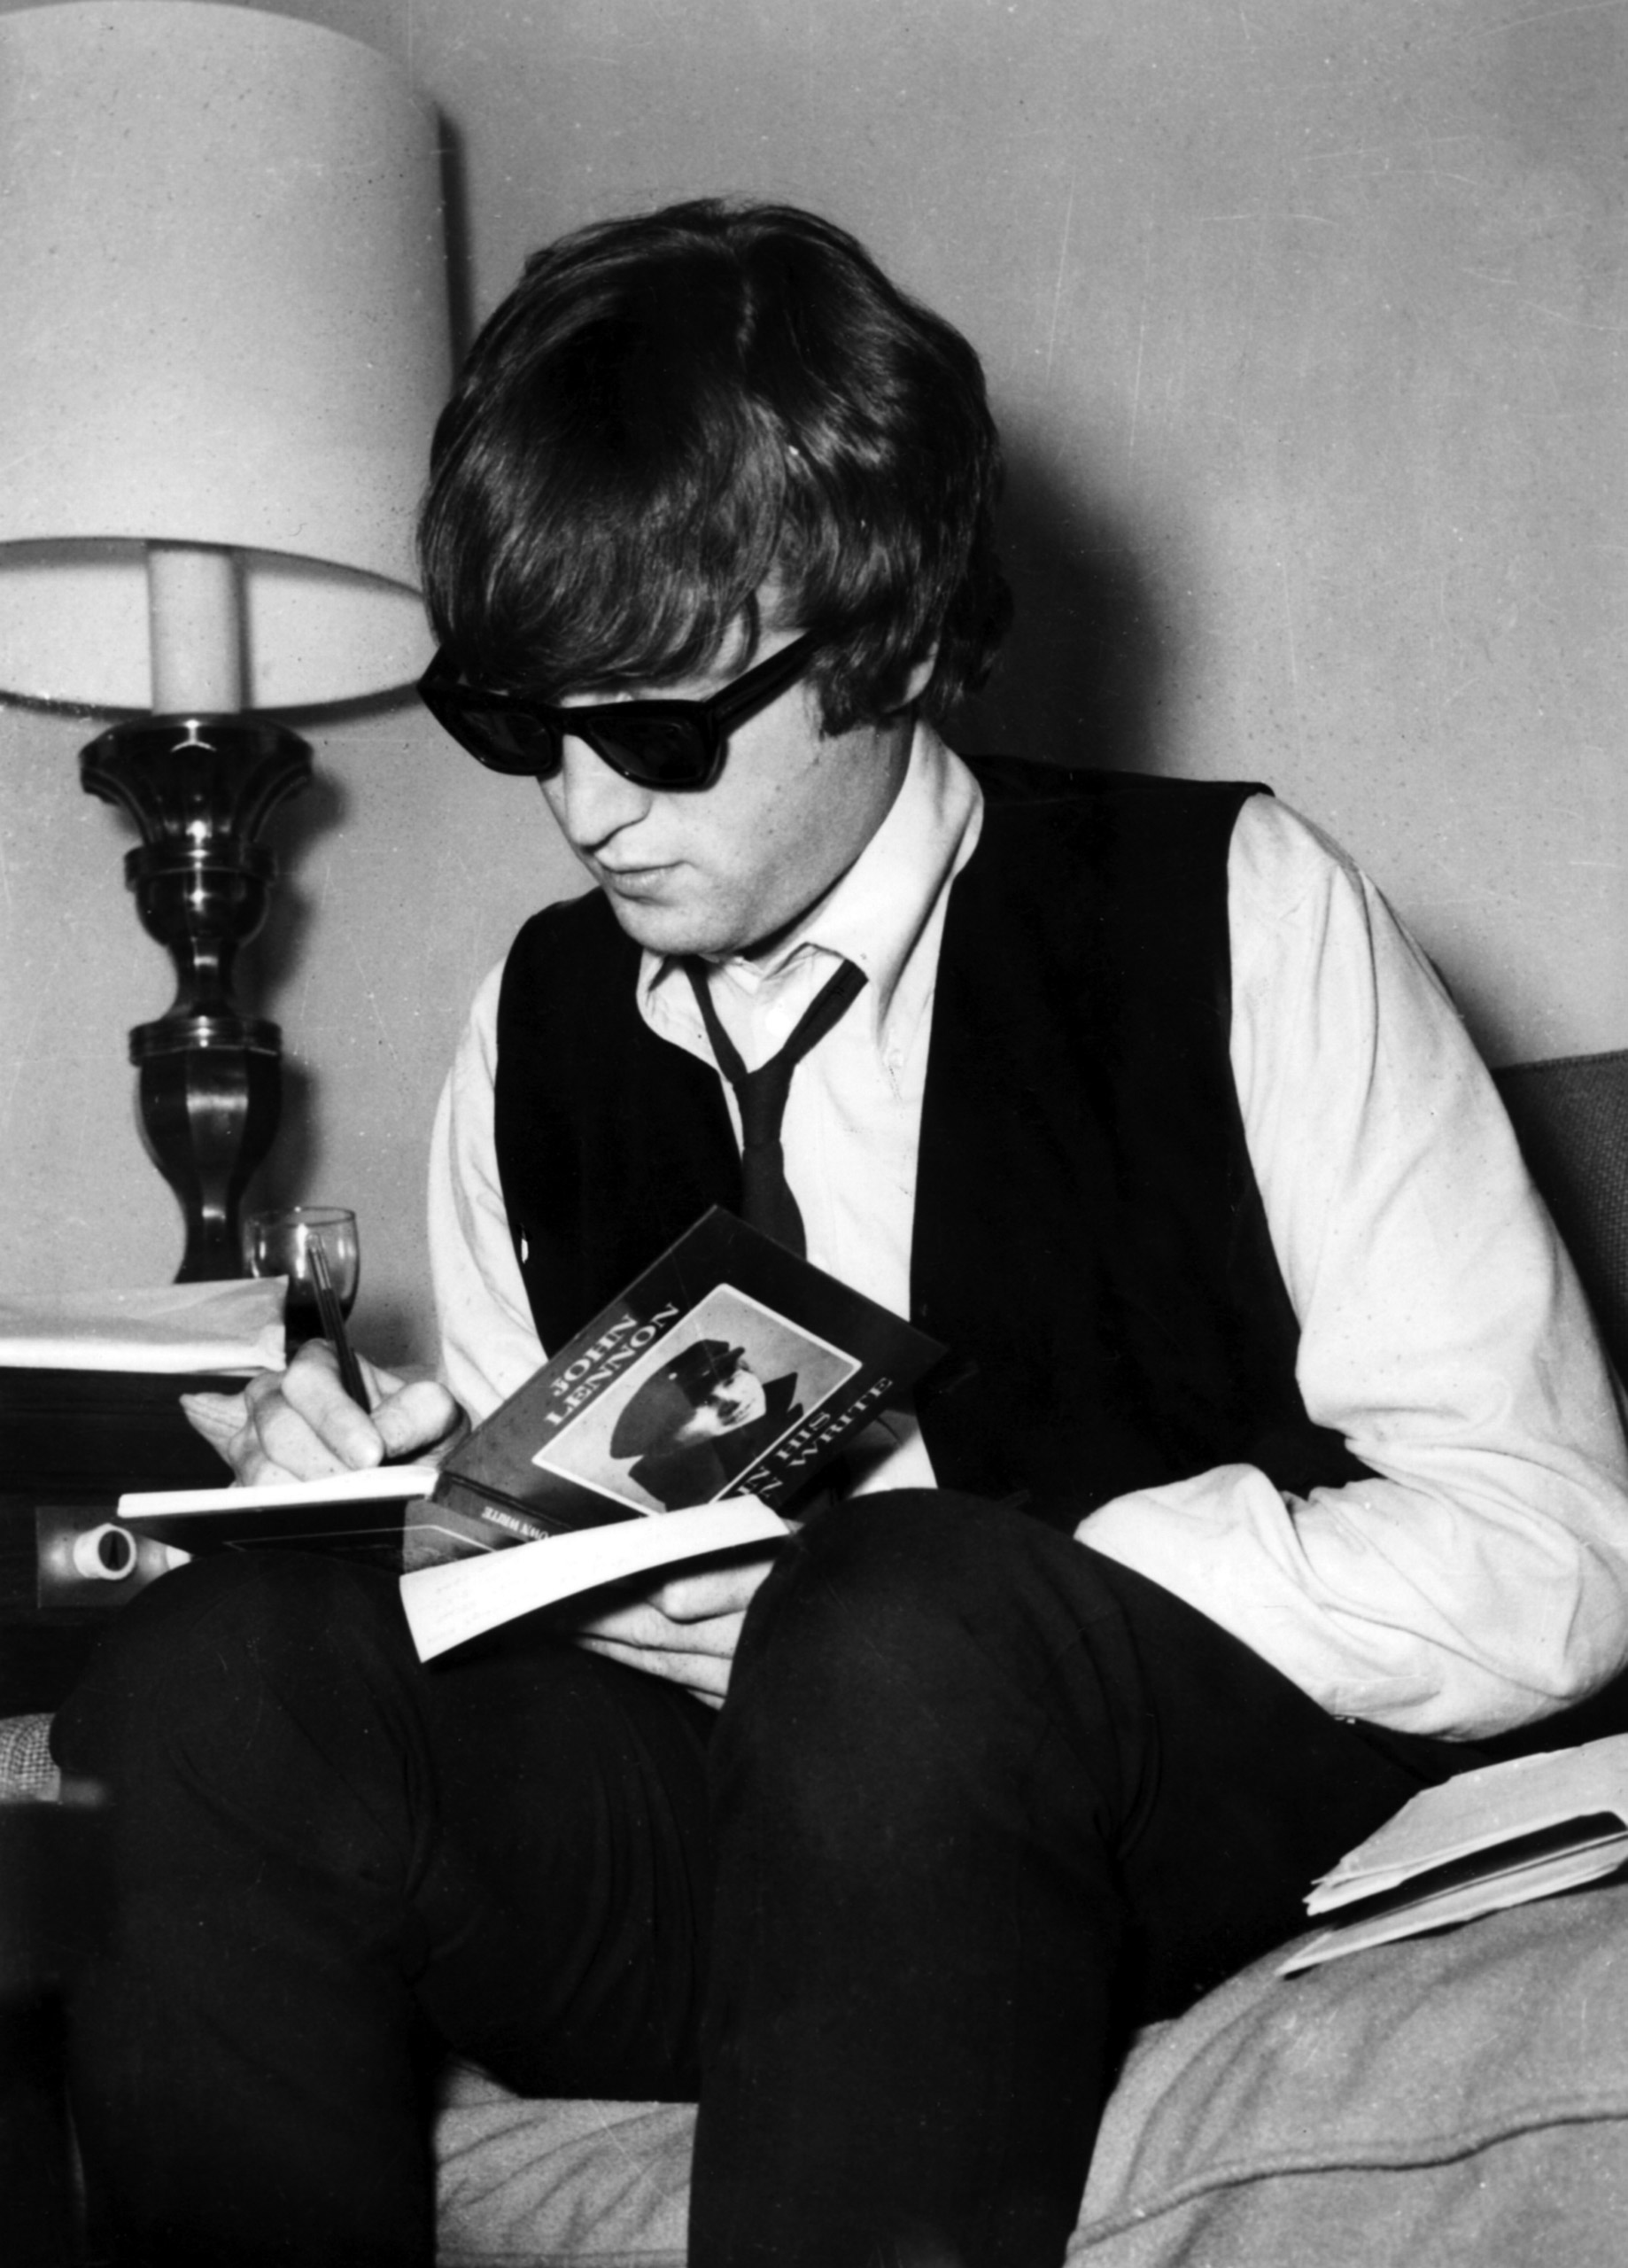 John Lennon sitting on bed in sunglasses signing a book.